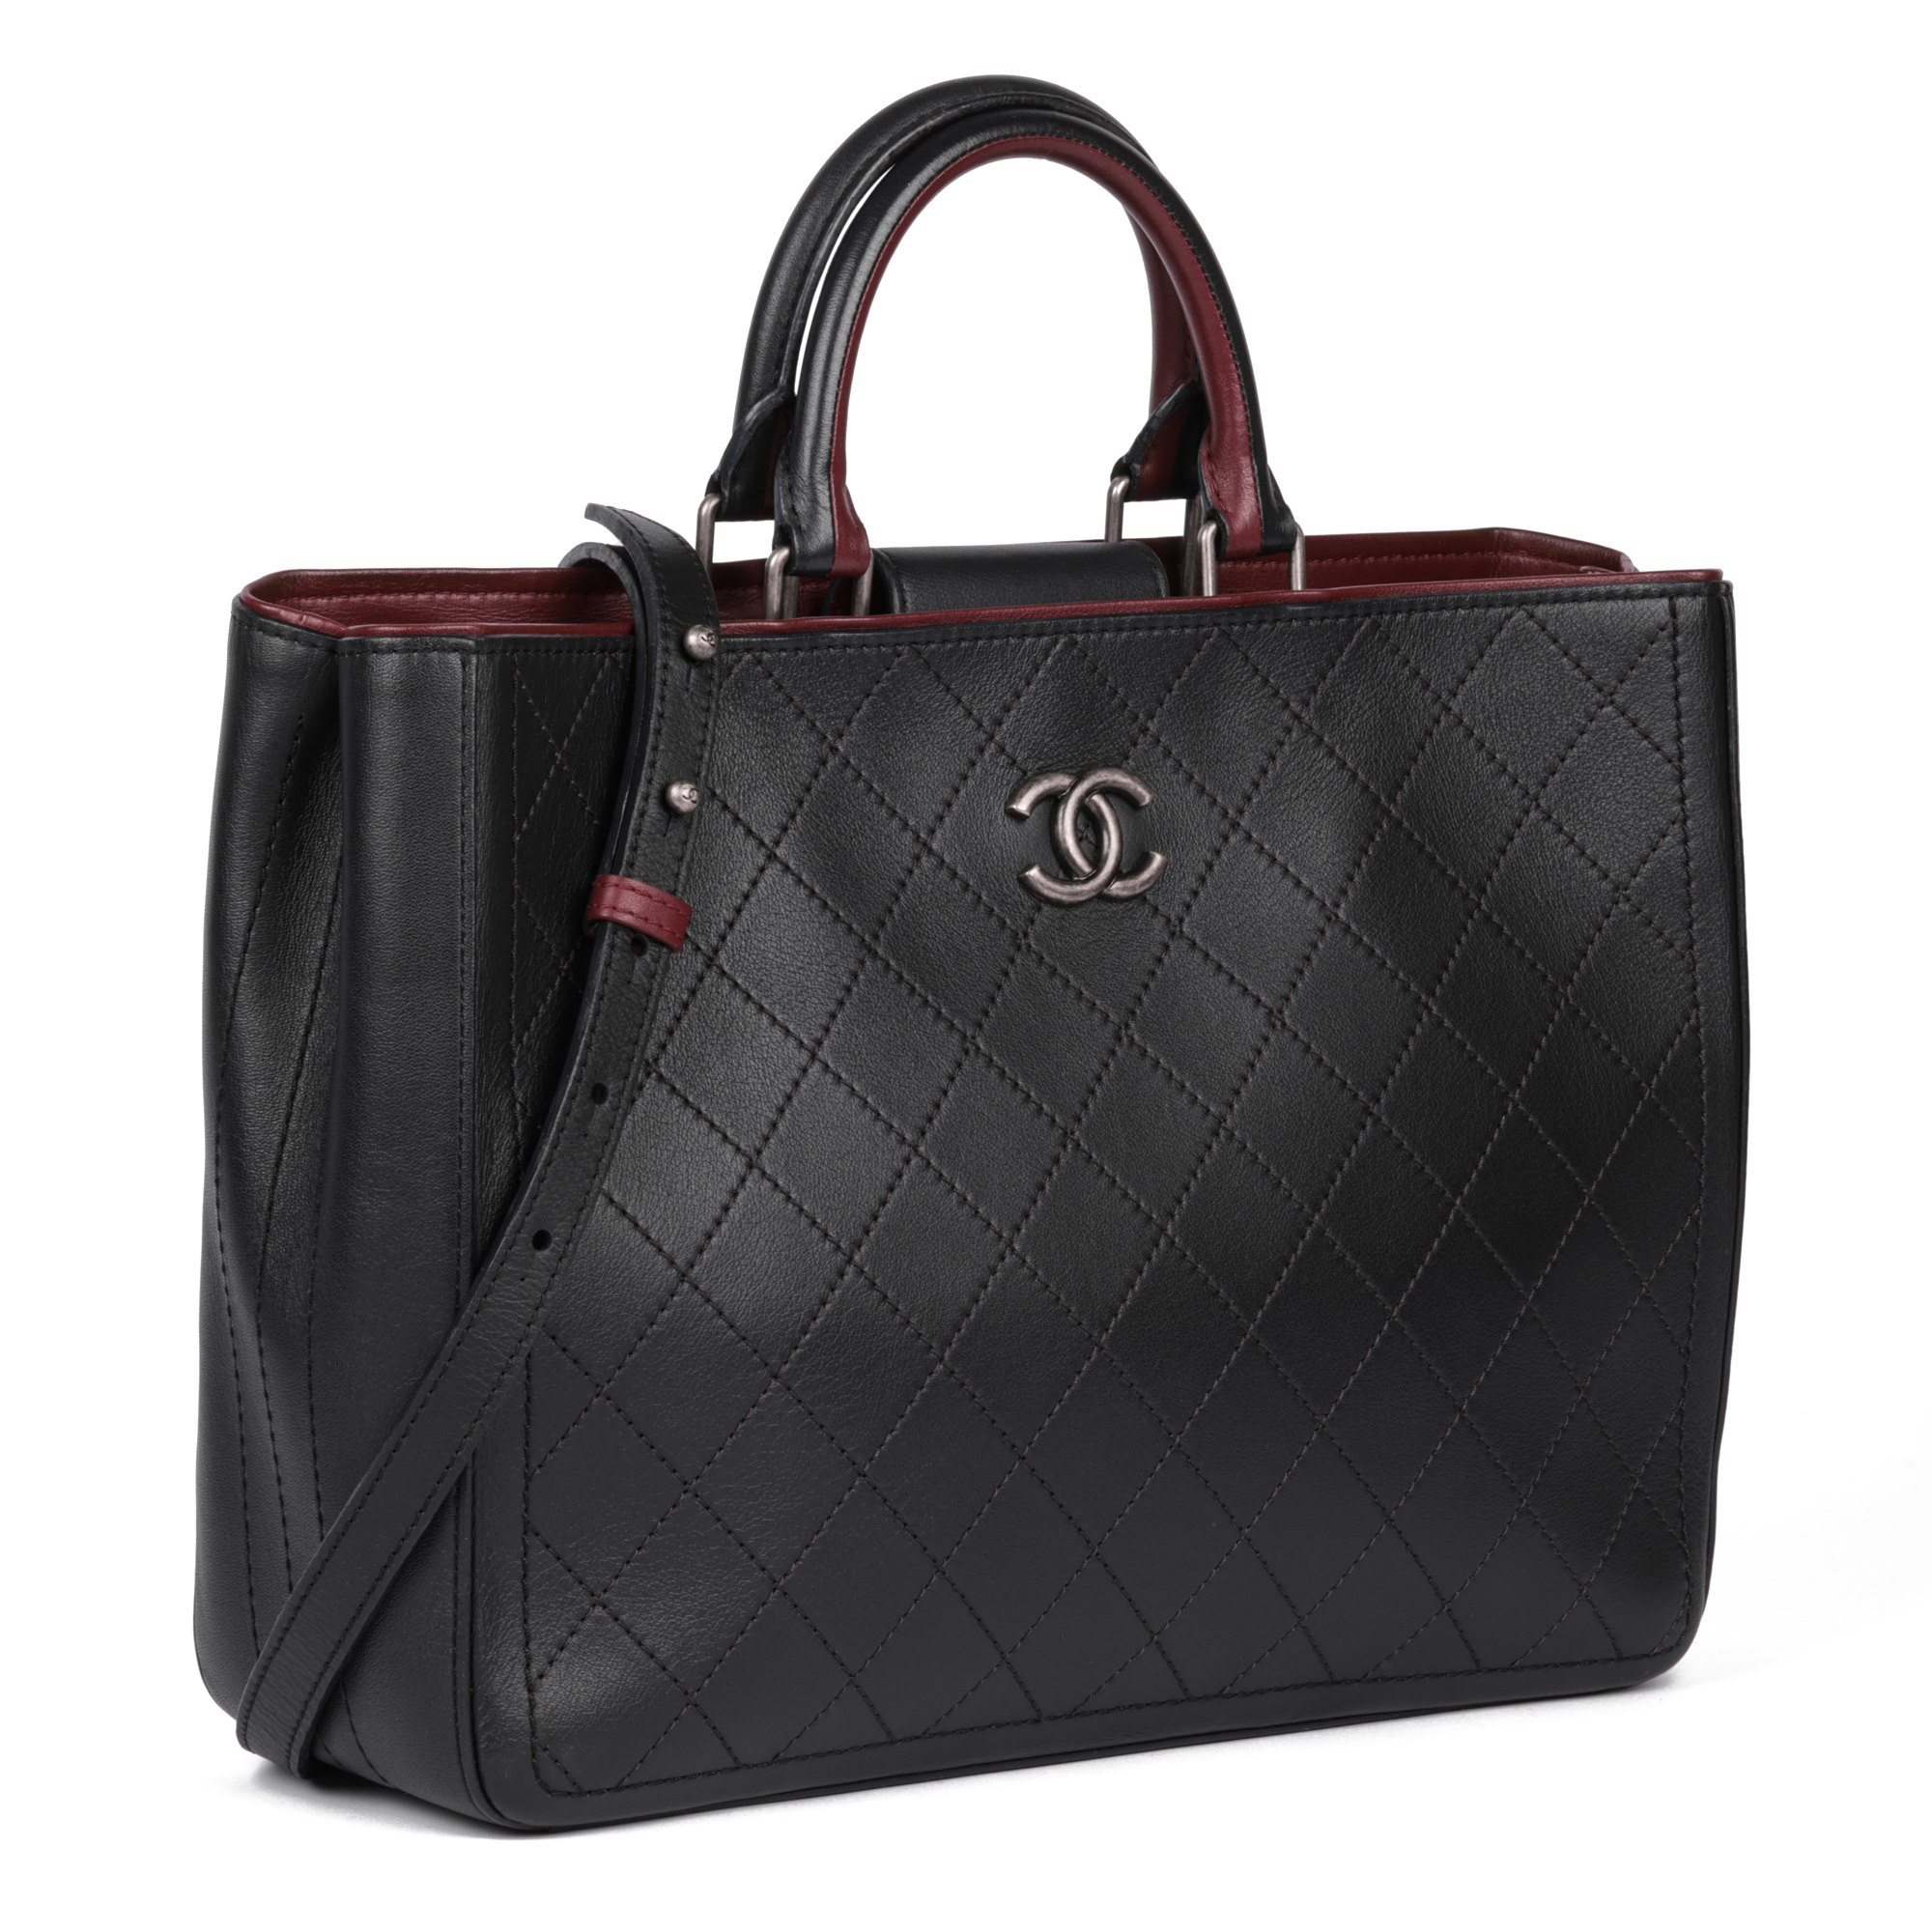 Chanel Black Quilted Bullskin Leather & Burgundy Large Classic Shopping Tote